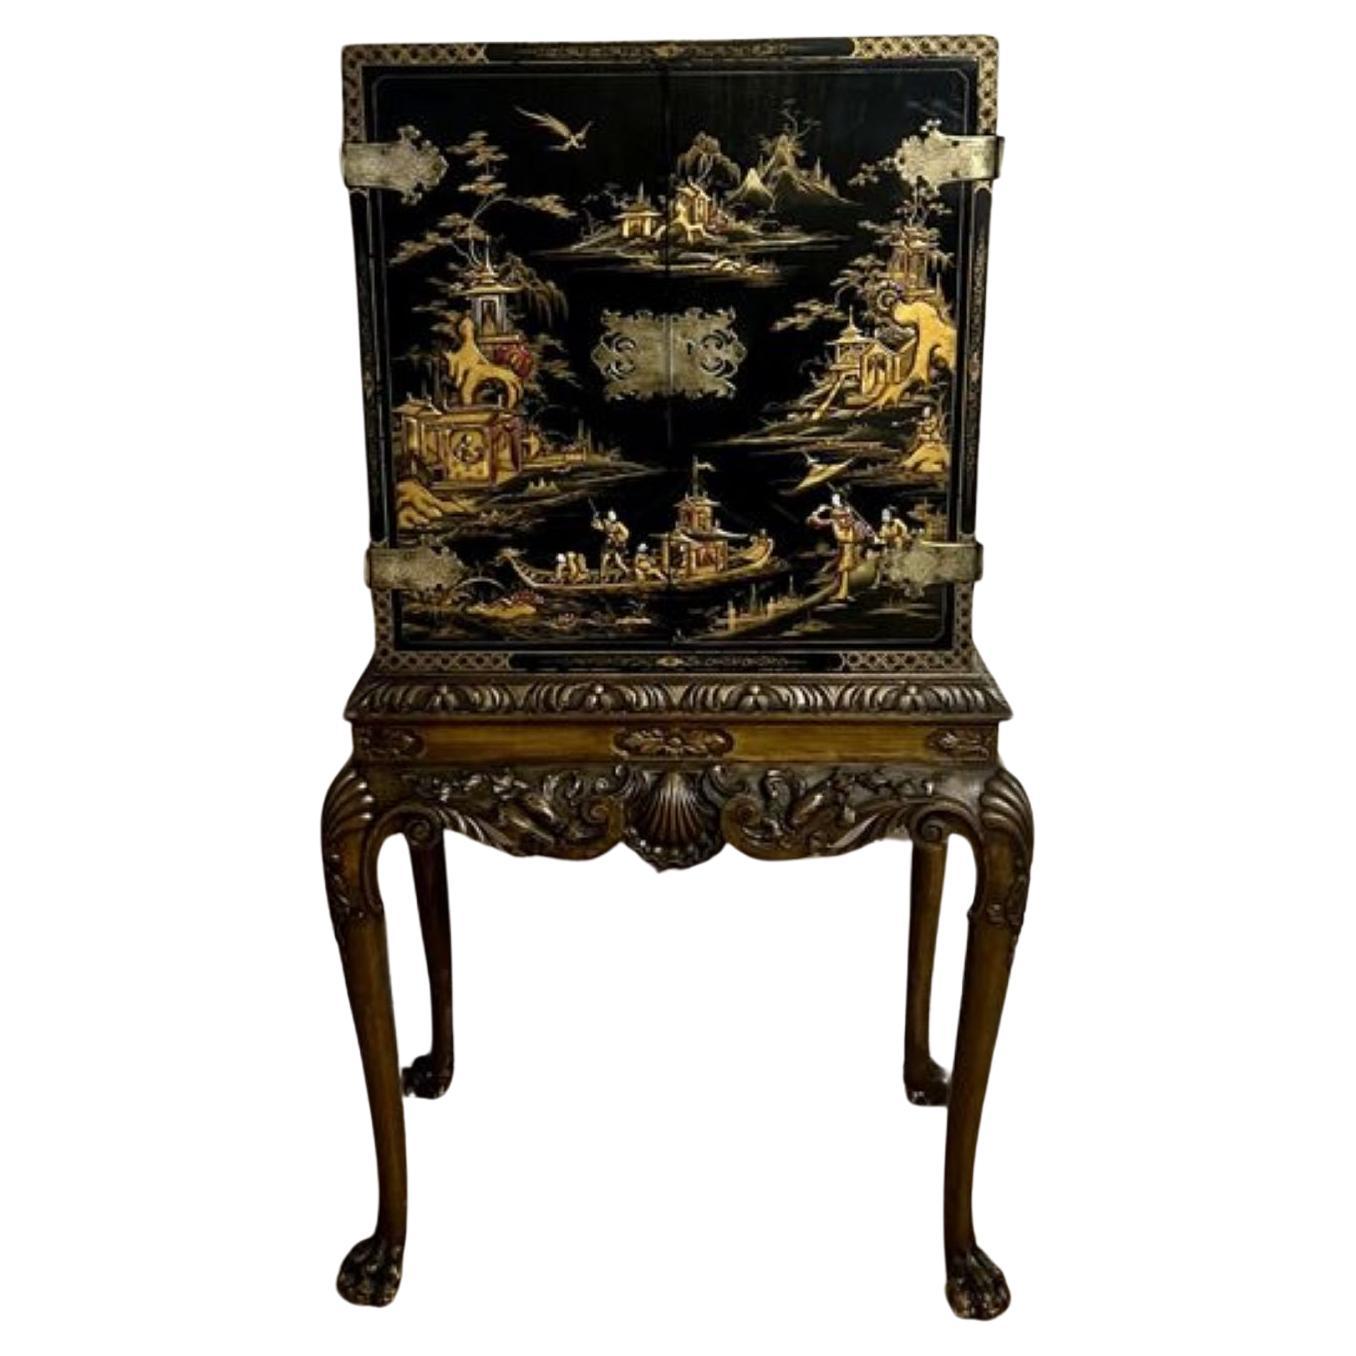 Outstanding quality antique Edwardian chinoiserie decorated cabinet on a stand